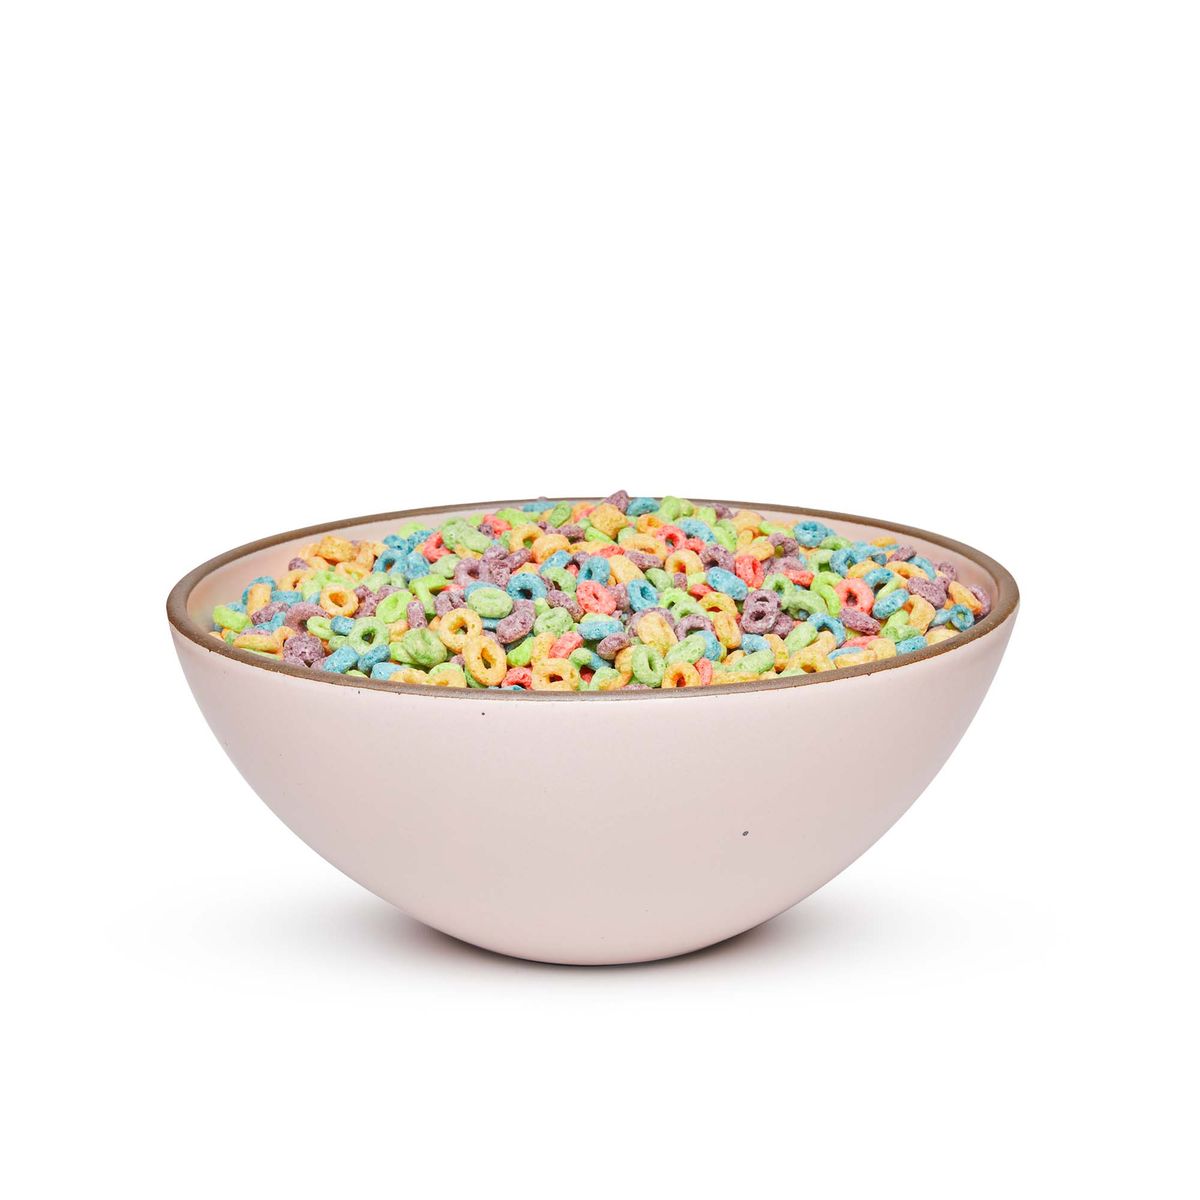 A large ceramic mixing bowl in a soft light pink color featuring iron speckles and an unglazed rim, filled with cereal